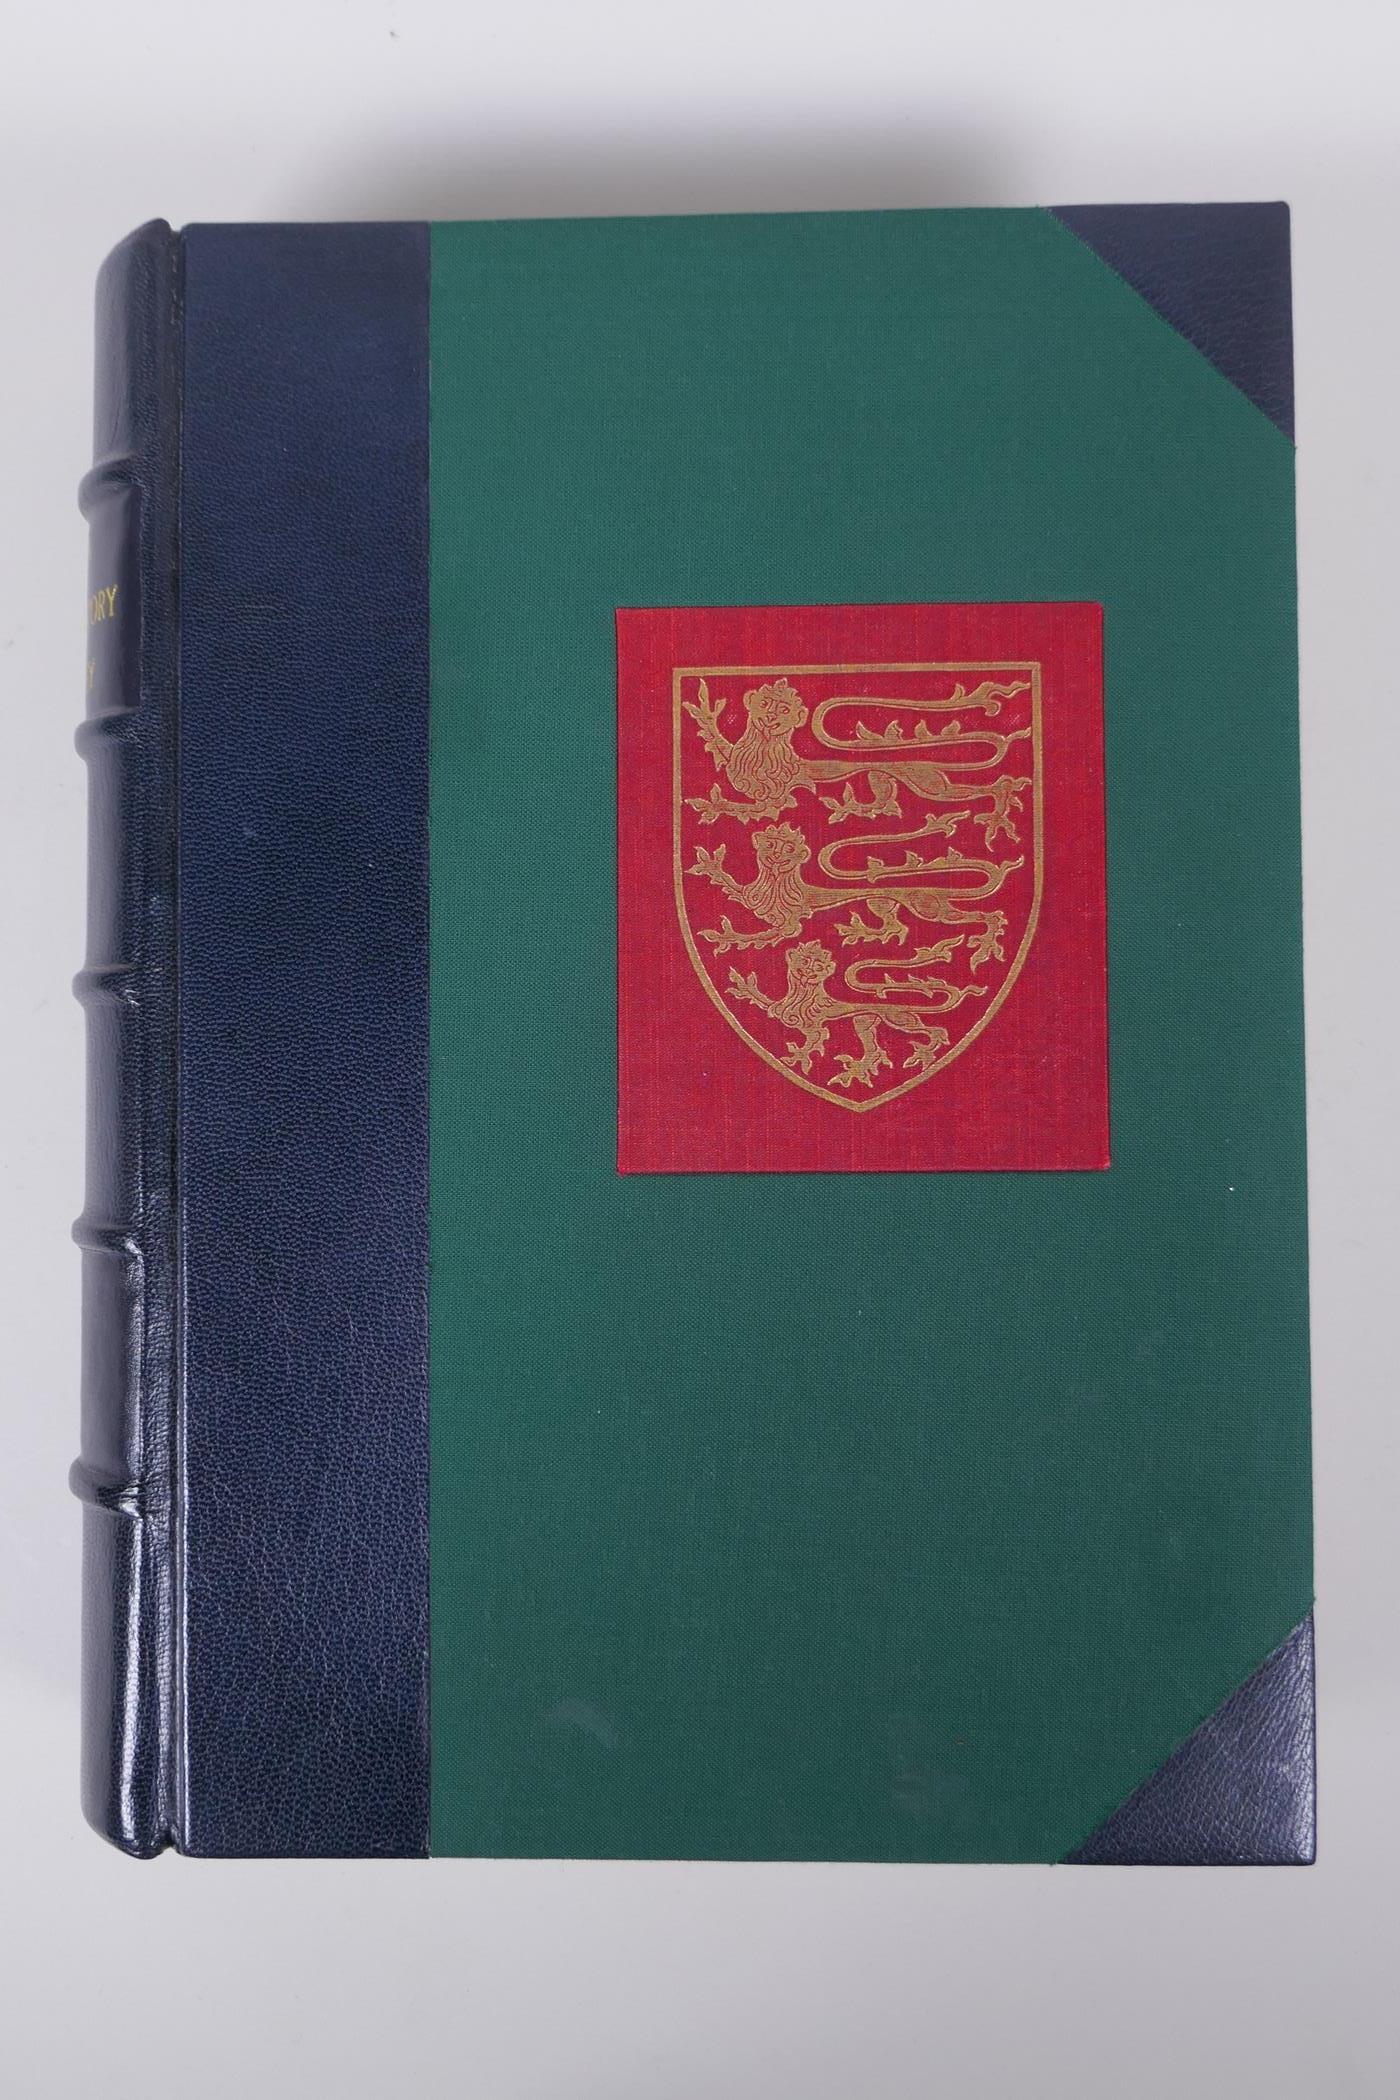 The Victoria History of the Counties of England, Surrey, Volume I, edited by H.E. Malden, - Image 2 of 6